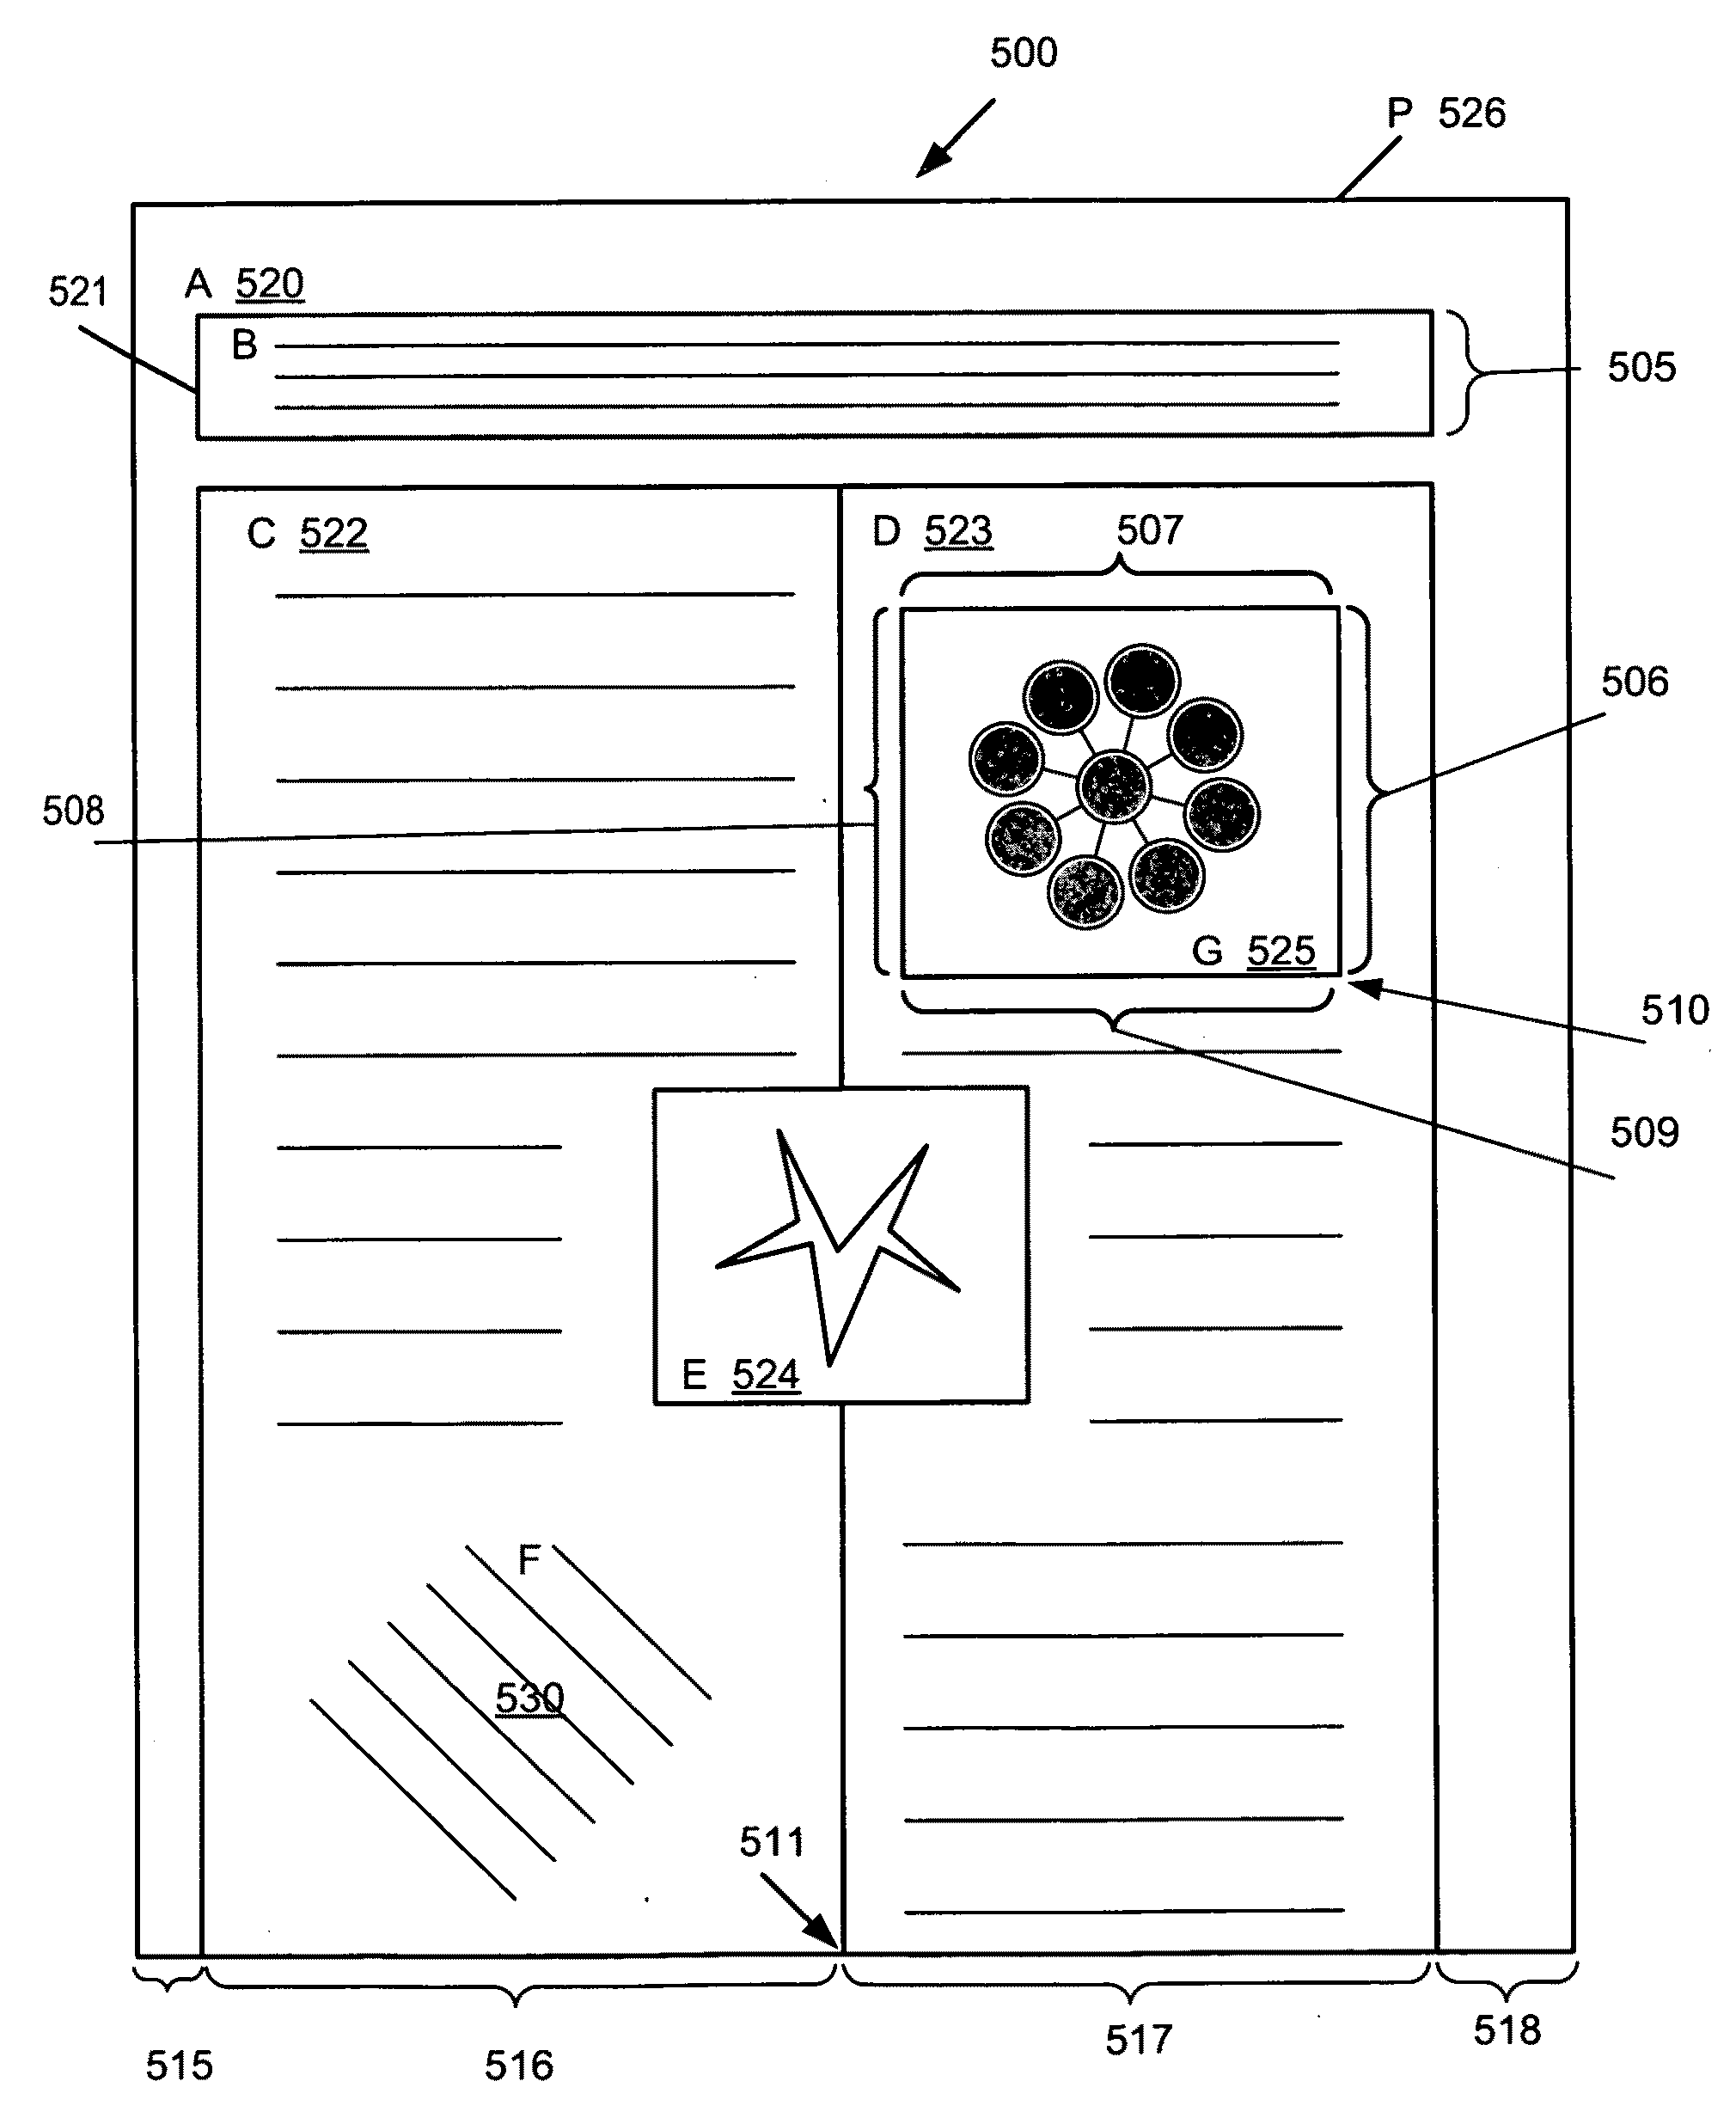 Identification of layout and content flow of an unstructured document